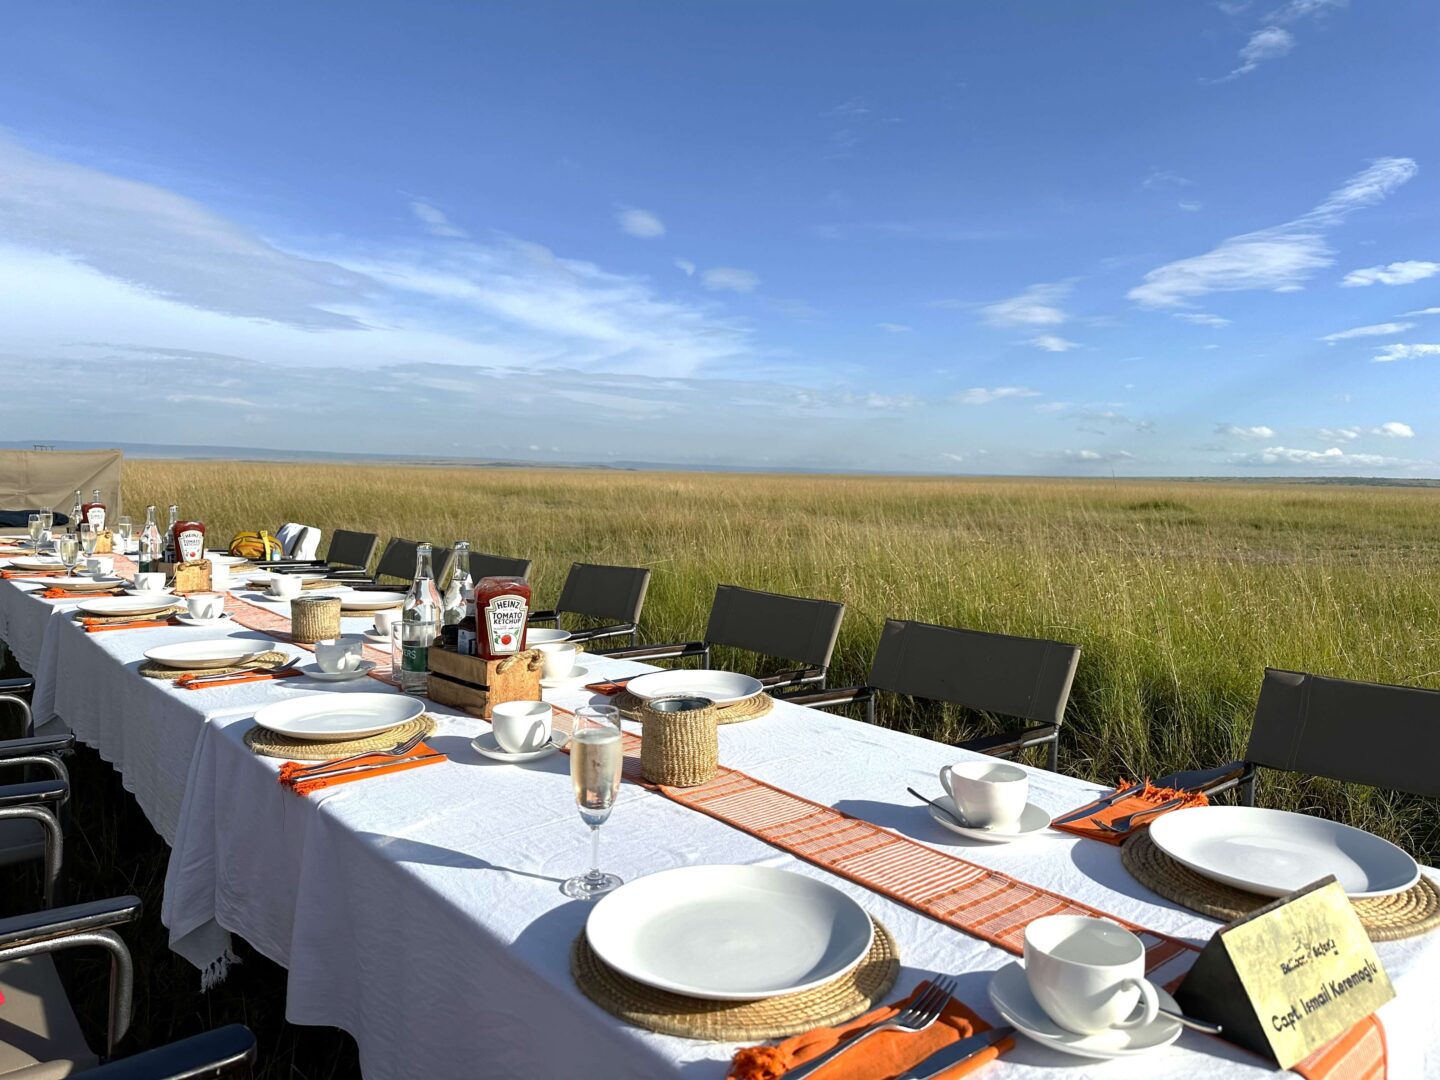 A long table with a white tablecloth and a beautiful cutlery setting, sits in the middle of the Maasai Mara park. 